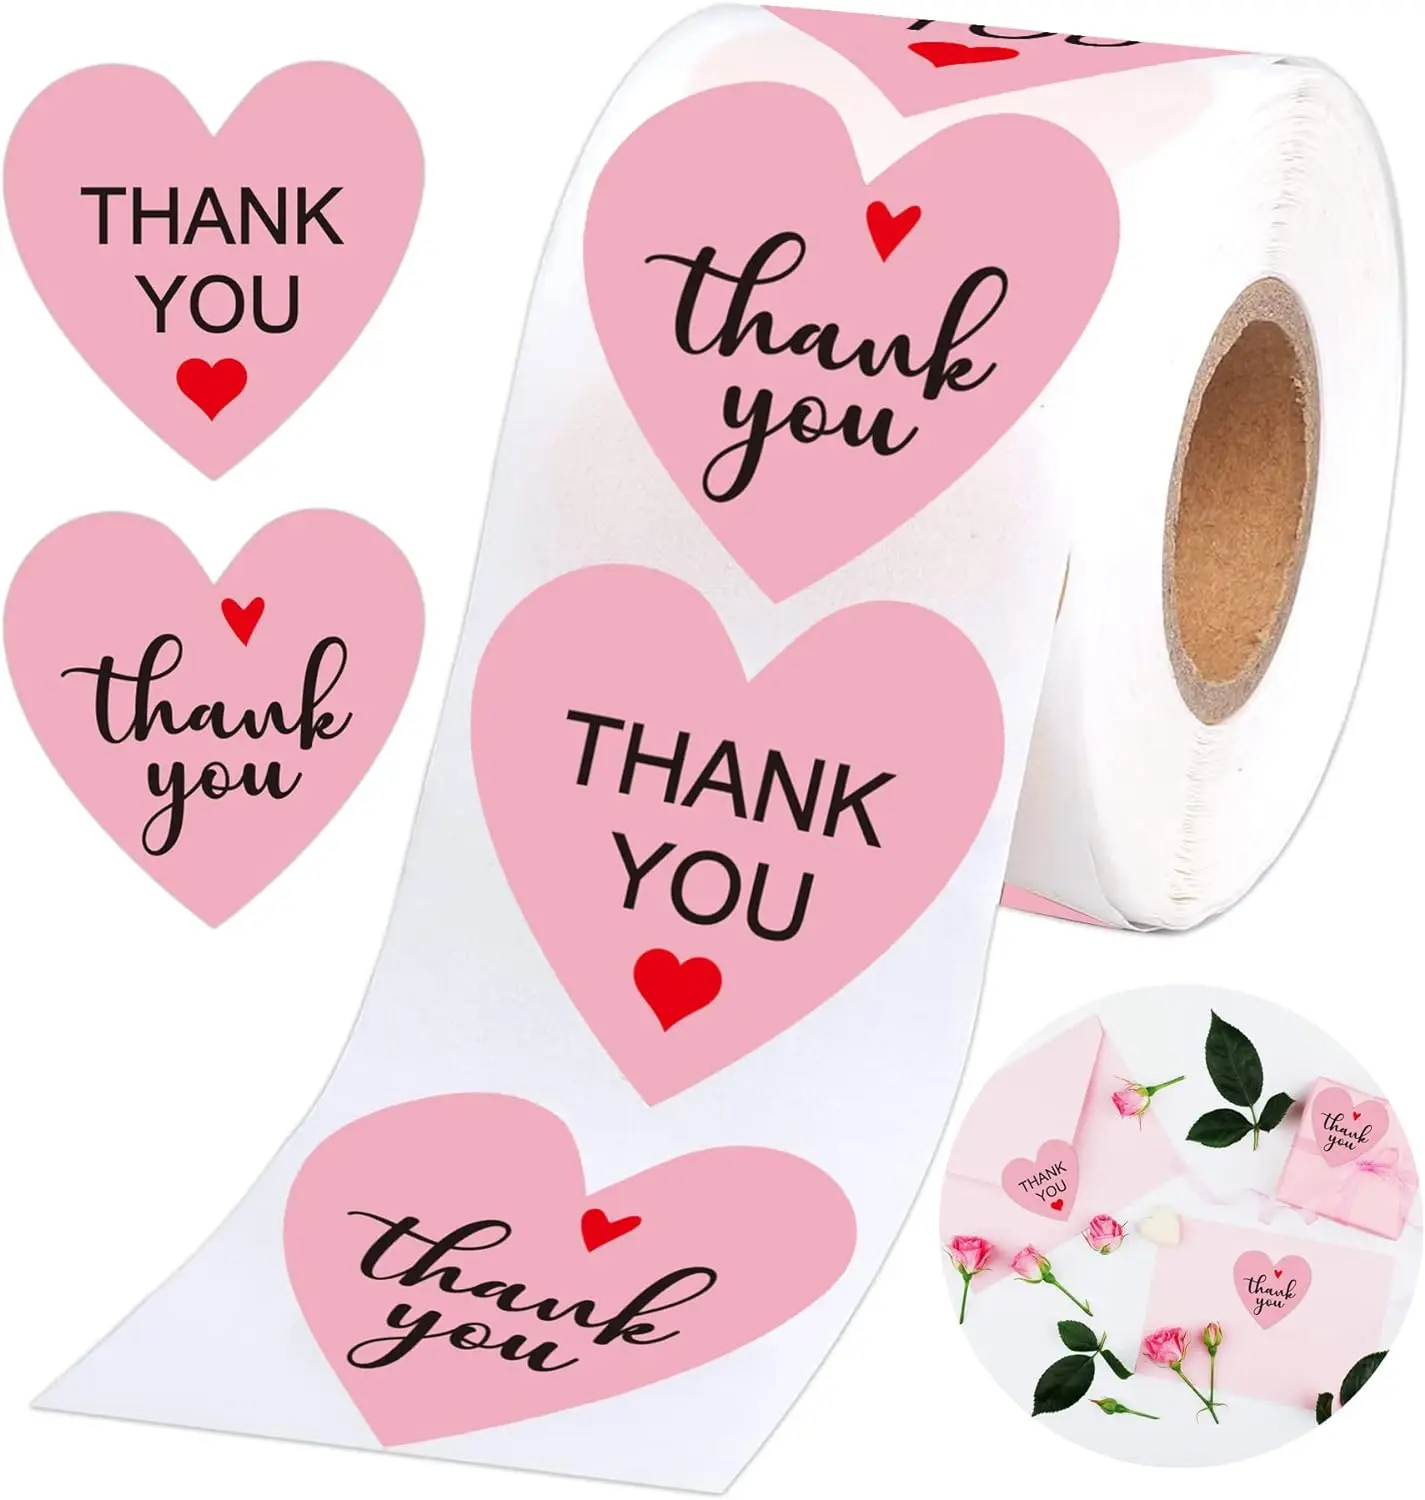 1.5 inch Pink Heart Shaped Thank You Sticker Roll Envelope Bouquet Wedding Birthday Party Supplies Business Stickers 500 PCS